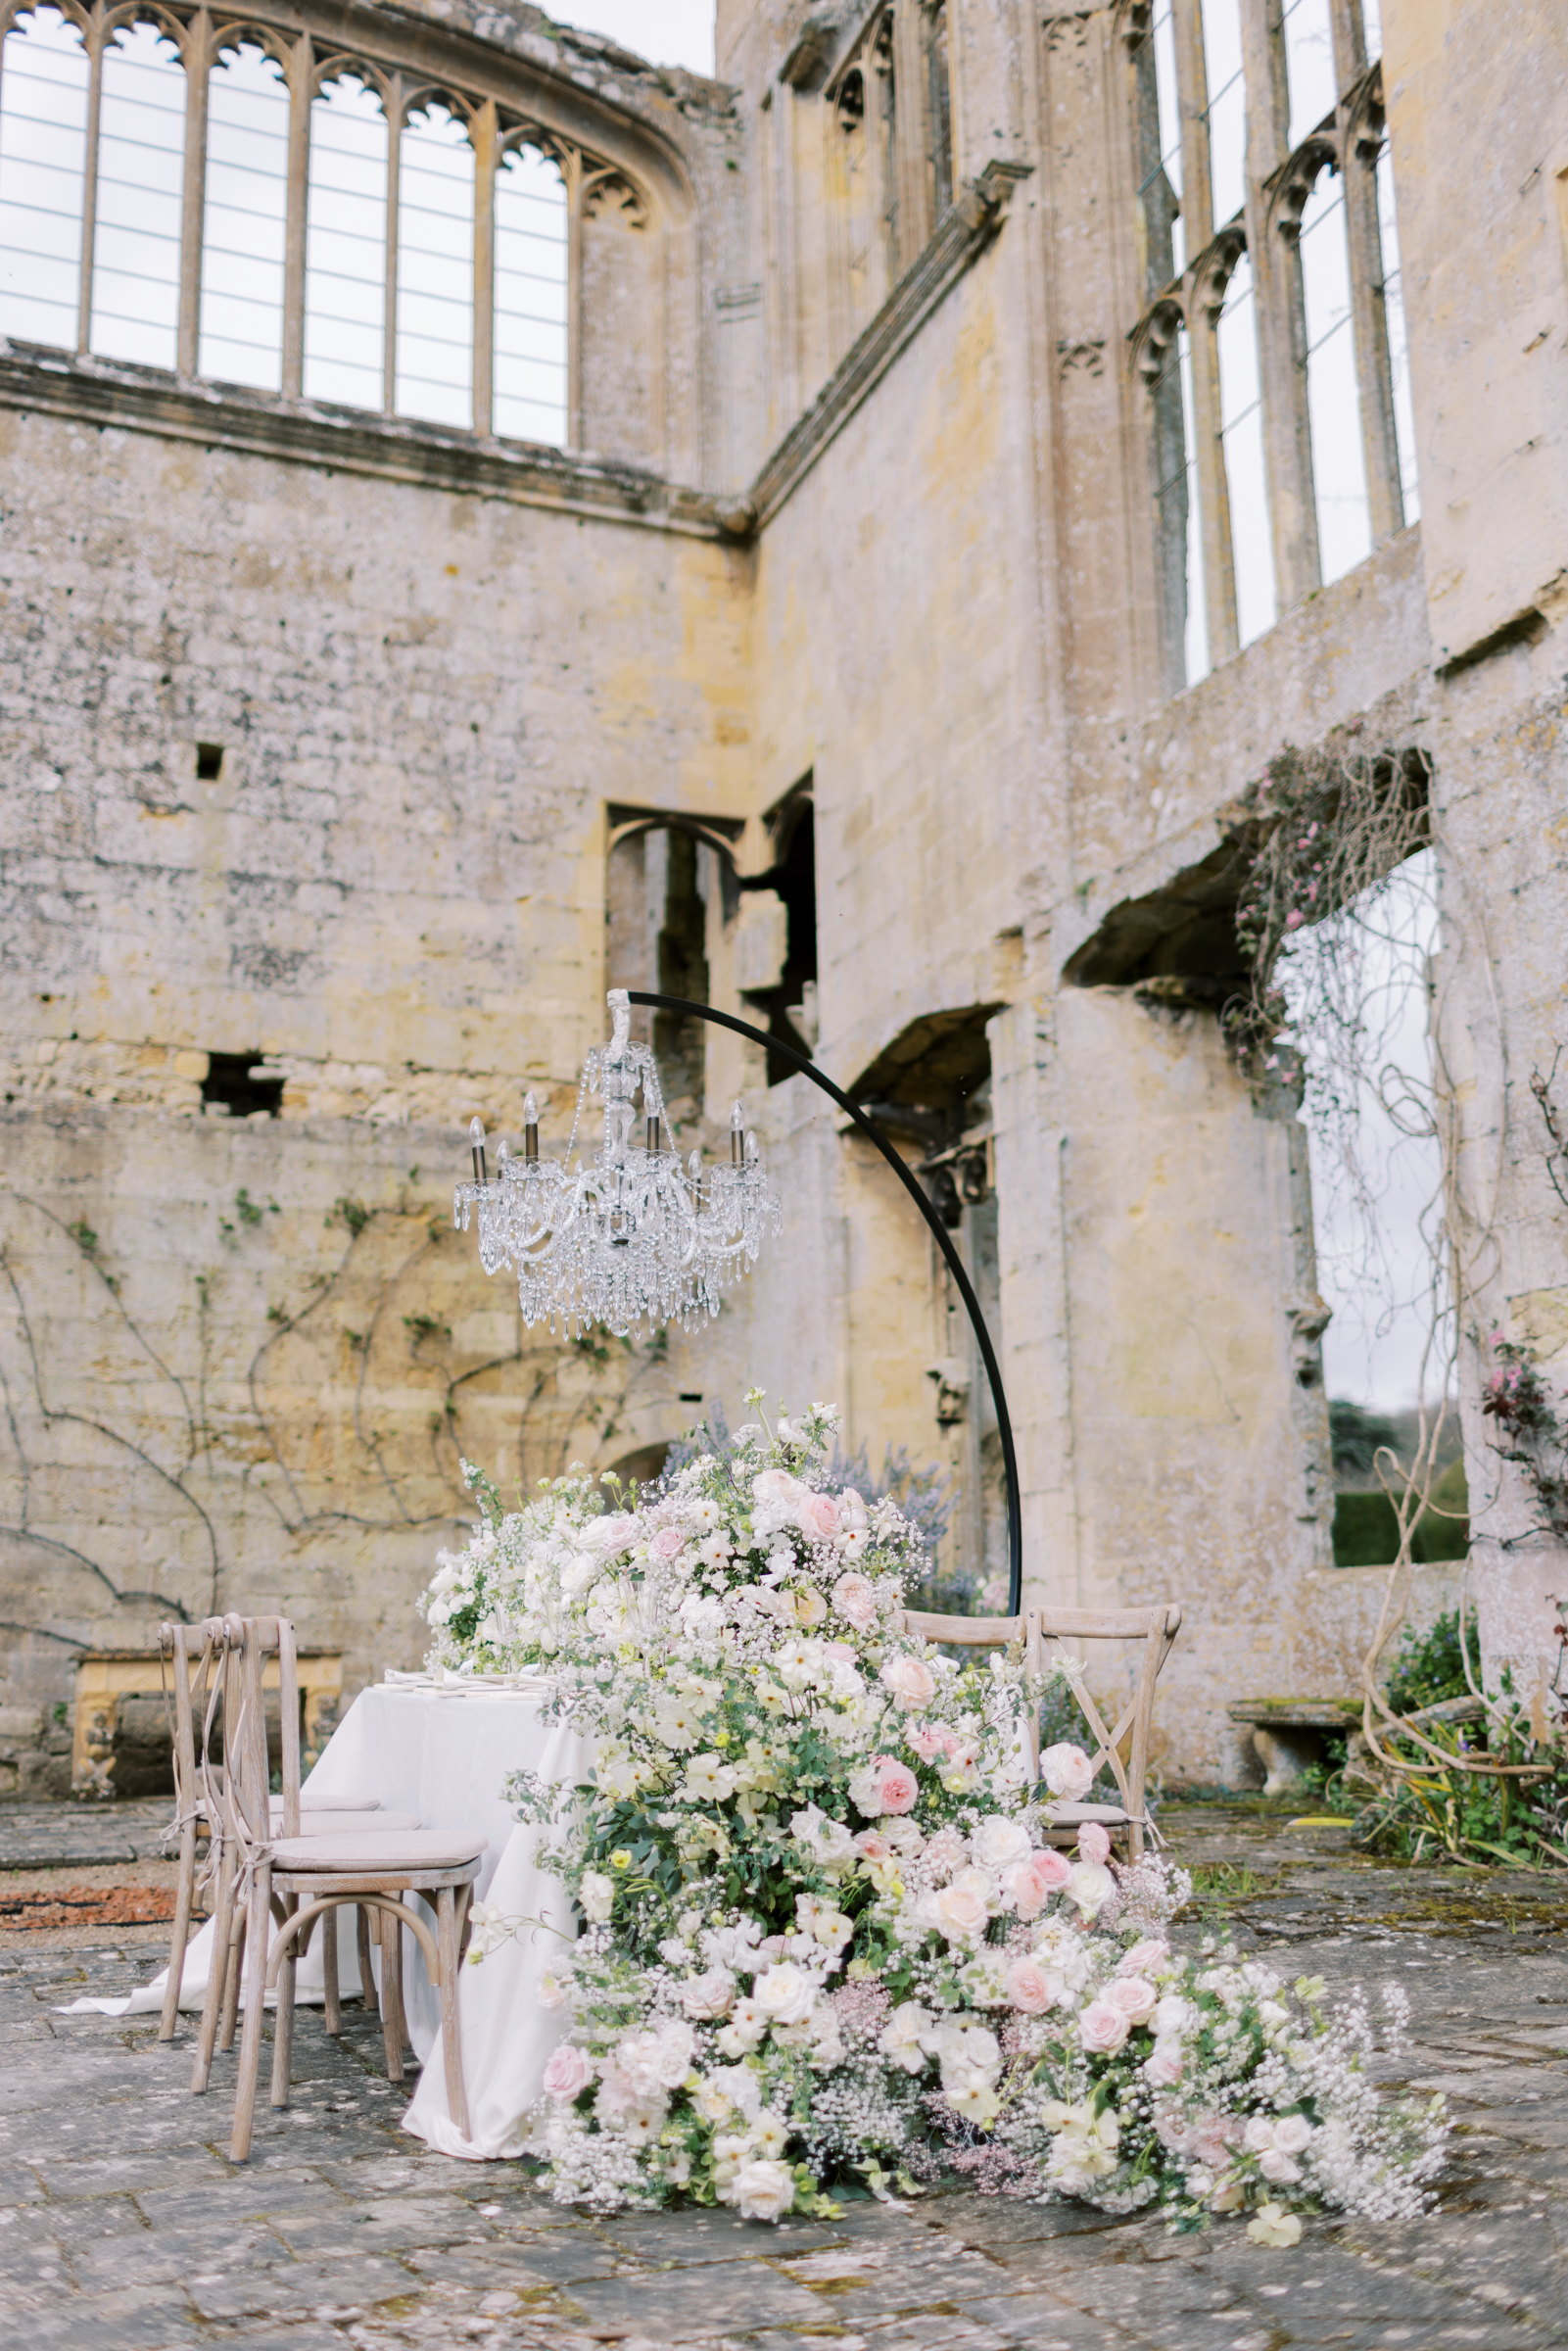 Dining under the stars on your wedding day at Sudeley Castle wedding venue in the Cotswolds